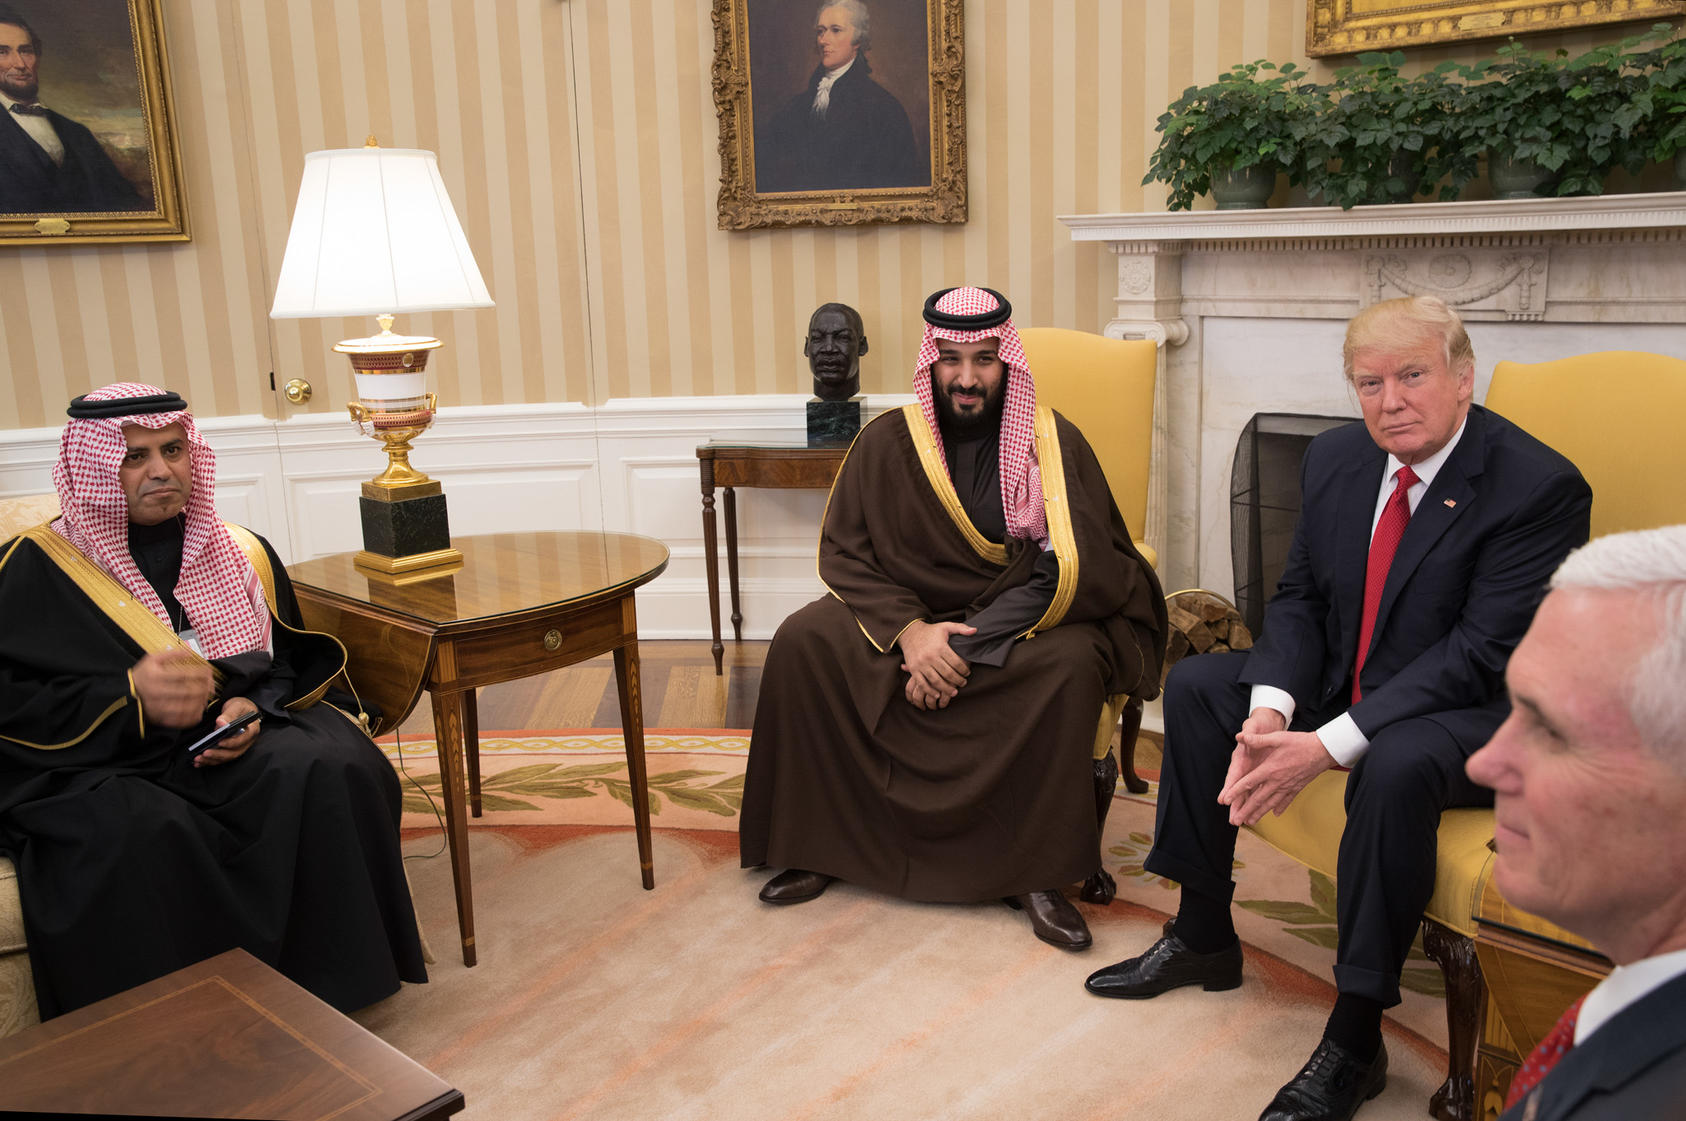 President Donald Trump meets with Saudi Deputy Crown Prince Mohammed bin Salman, who is King Salman’s son and the defense minister, in the Oval Office of the White House in Washington, March 14, 2017. Photo Courtesy of The New York Times/Stephen Crowley